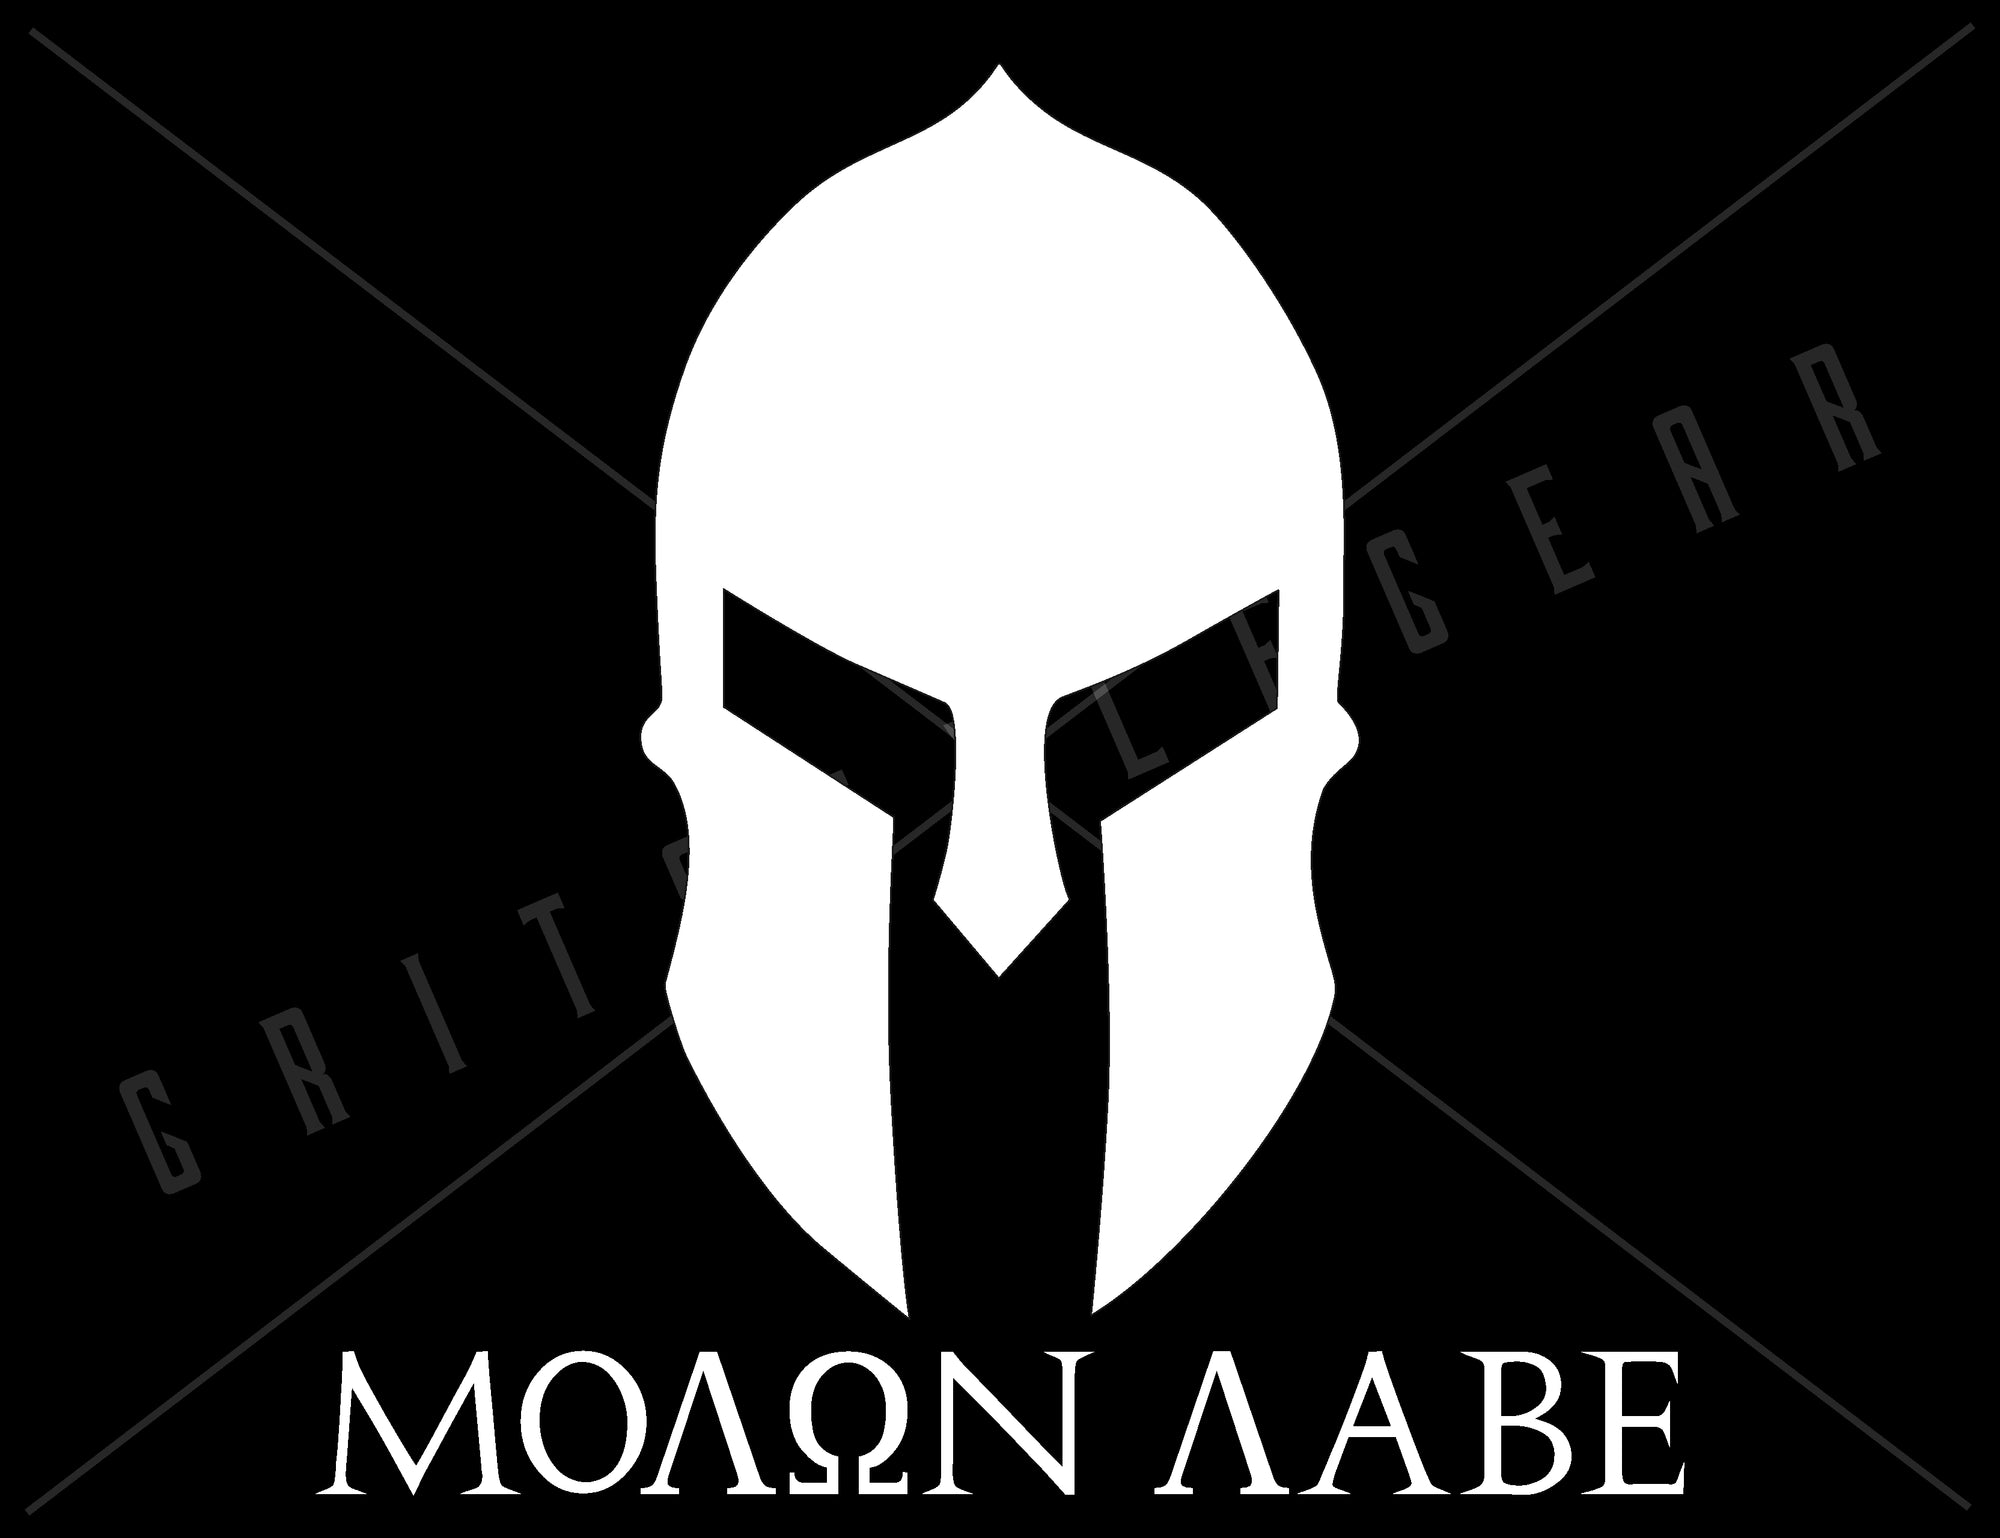 Molon Labe - Come and take it Vinyl Decal | Grit Style Gear